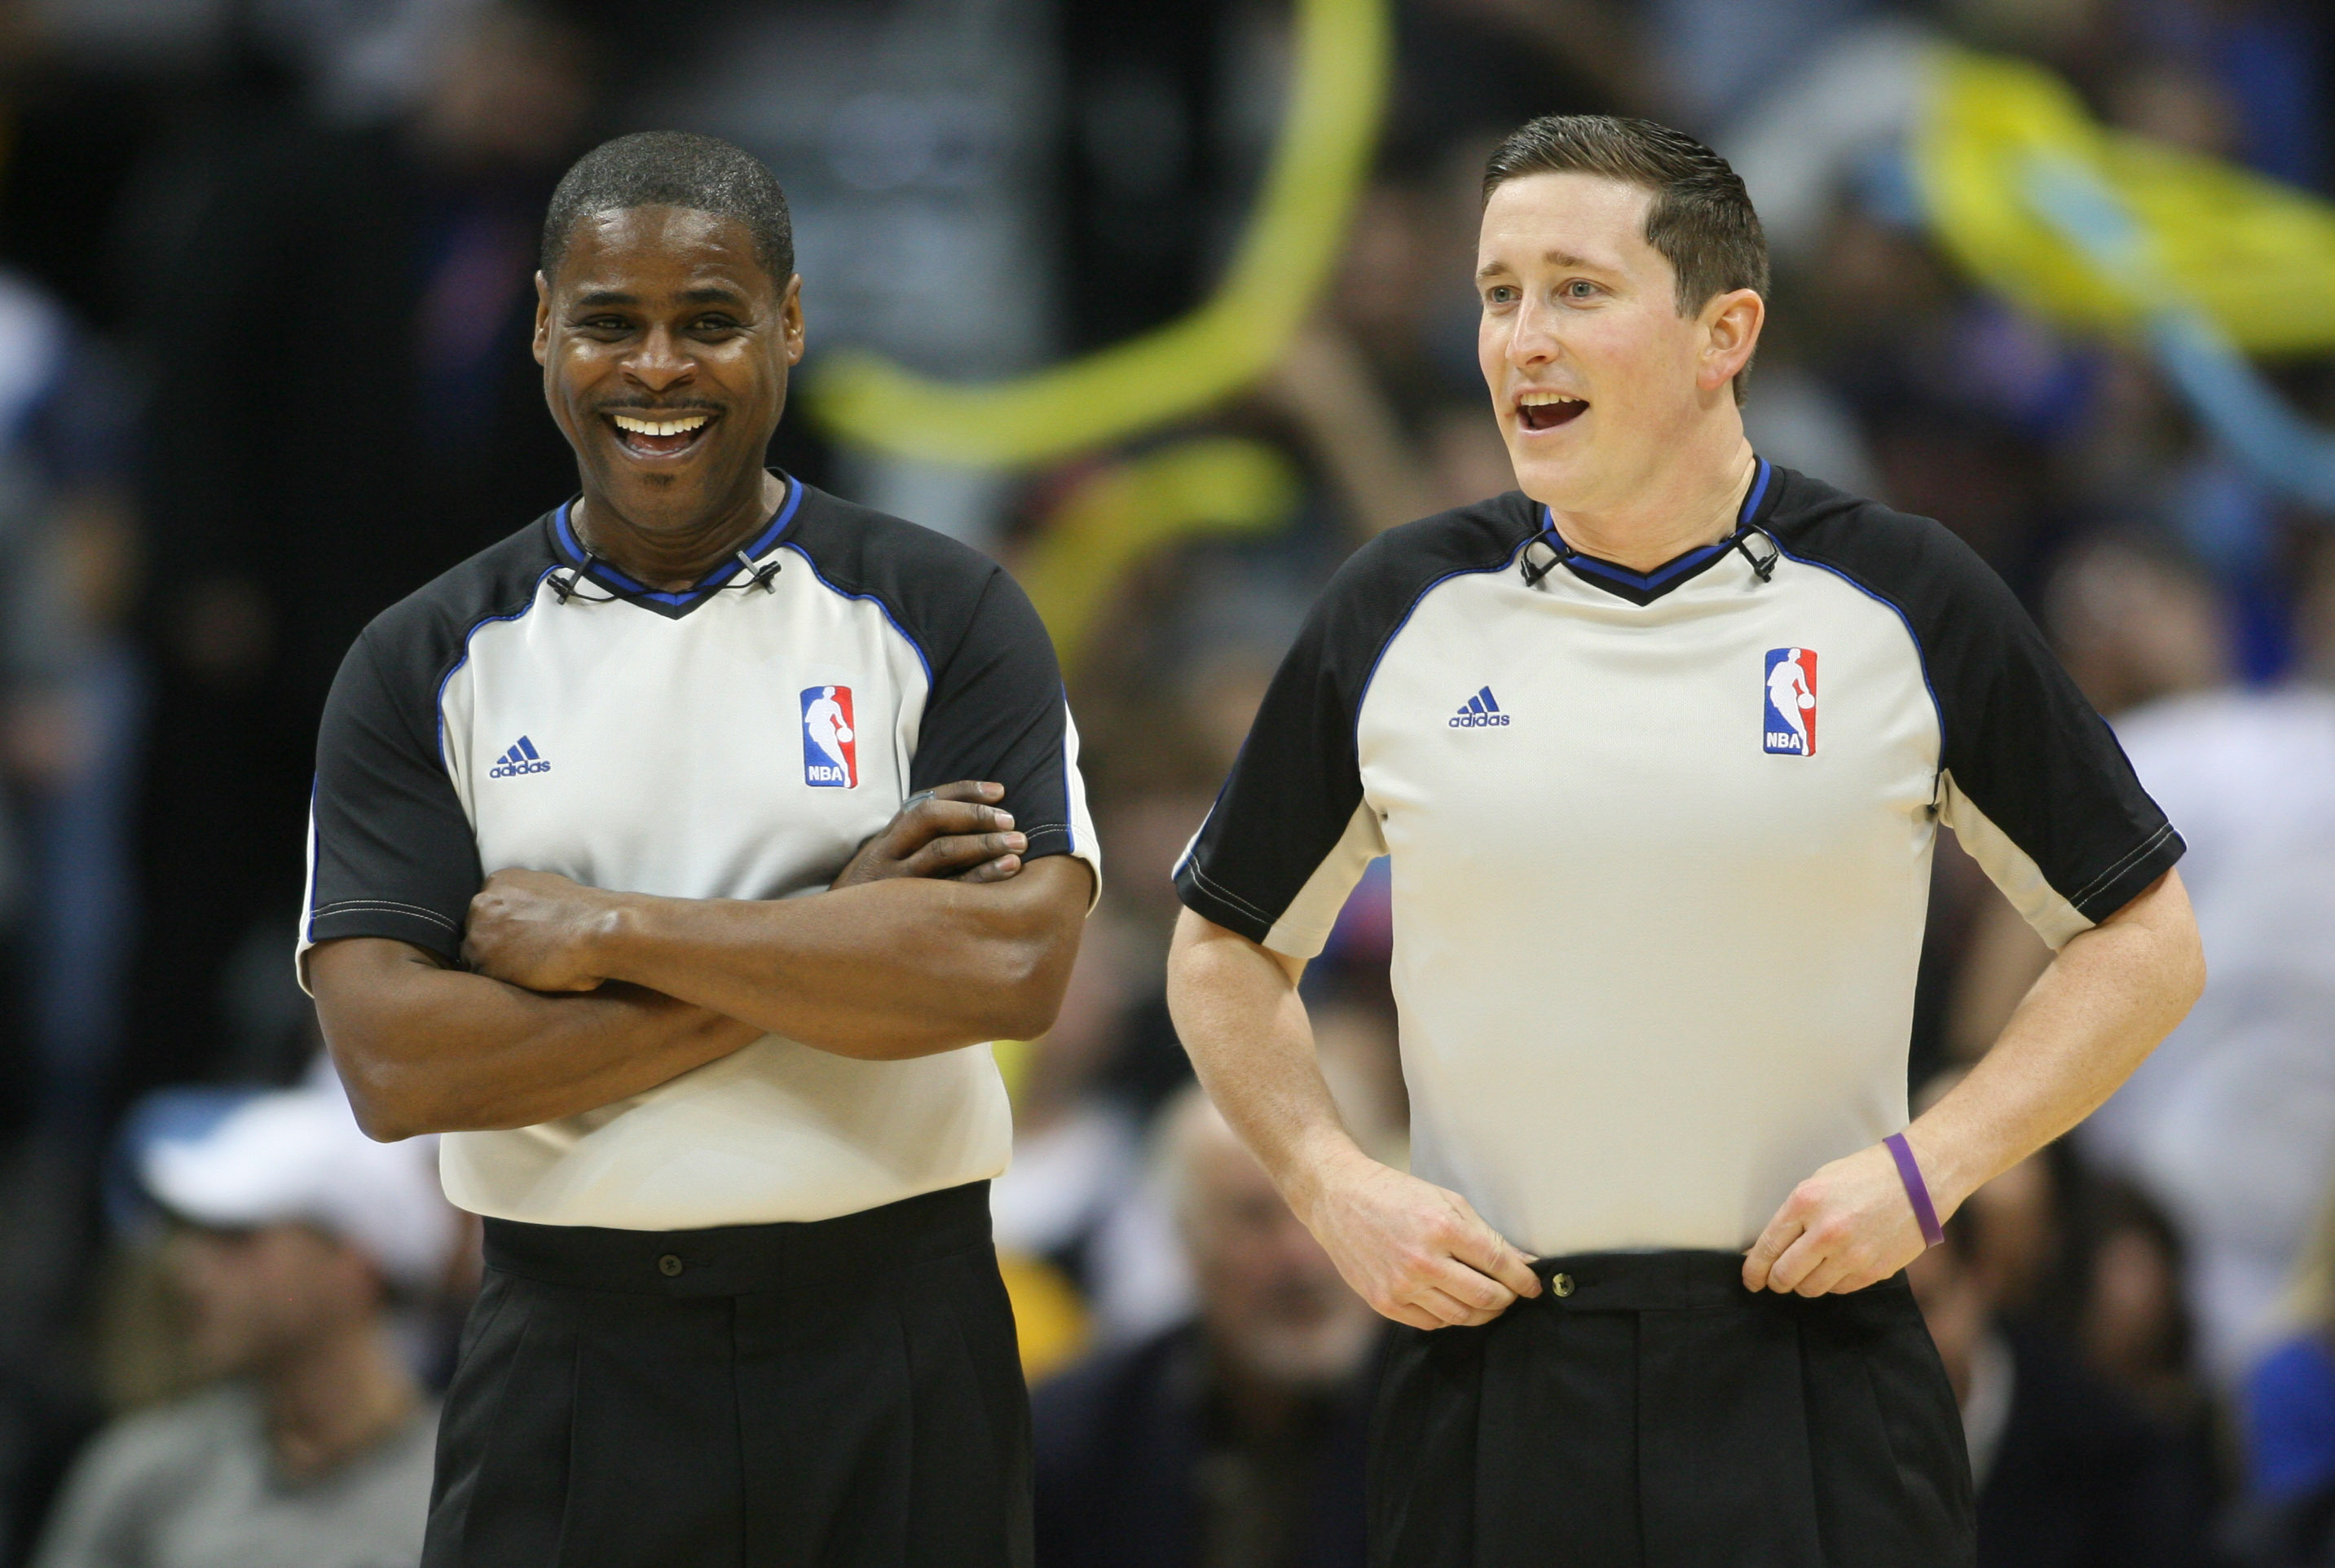 What are the NBA's rules regarding uniforms? Are there alternate